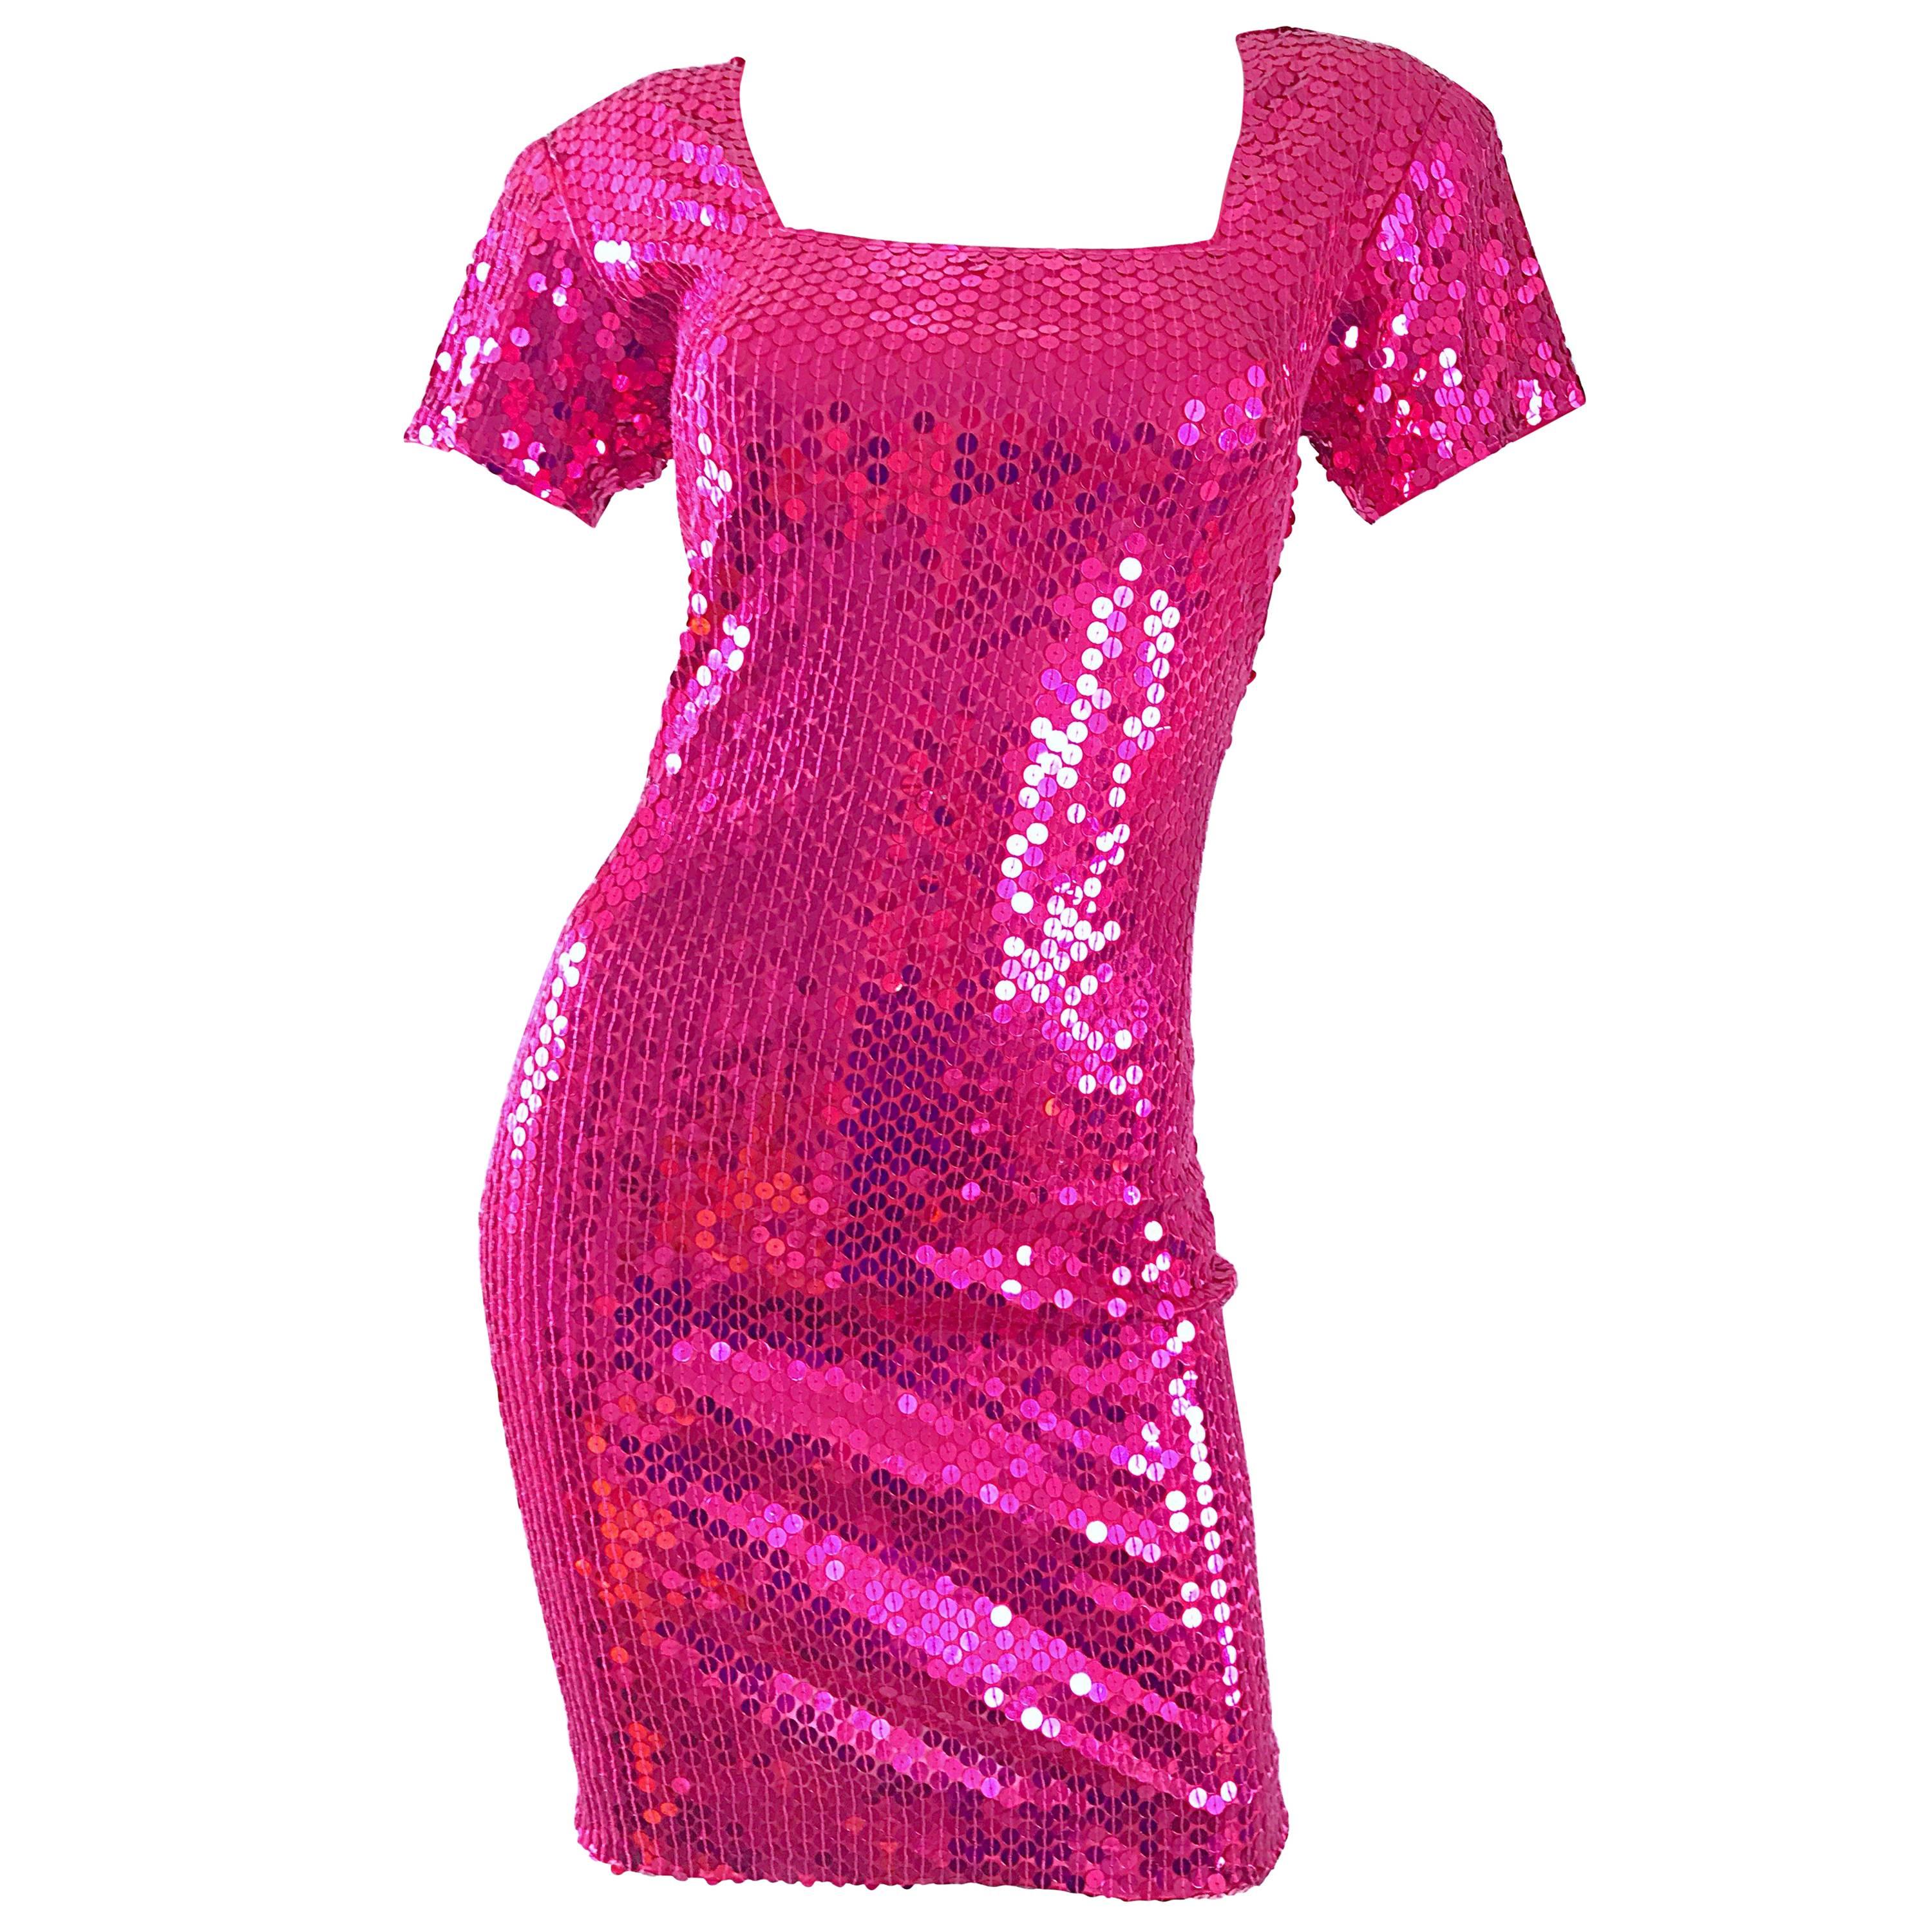 Sexy 1990s Hot Pink Fully Sequined Fuchsia Bodycon Vintage 90s Mini Dress For Sale